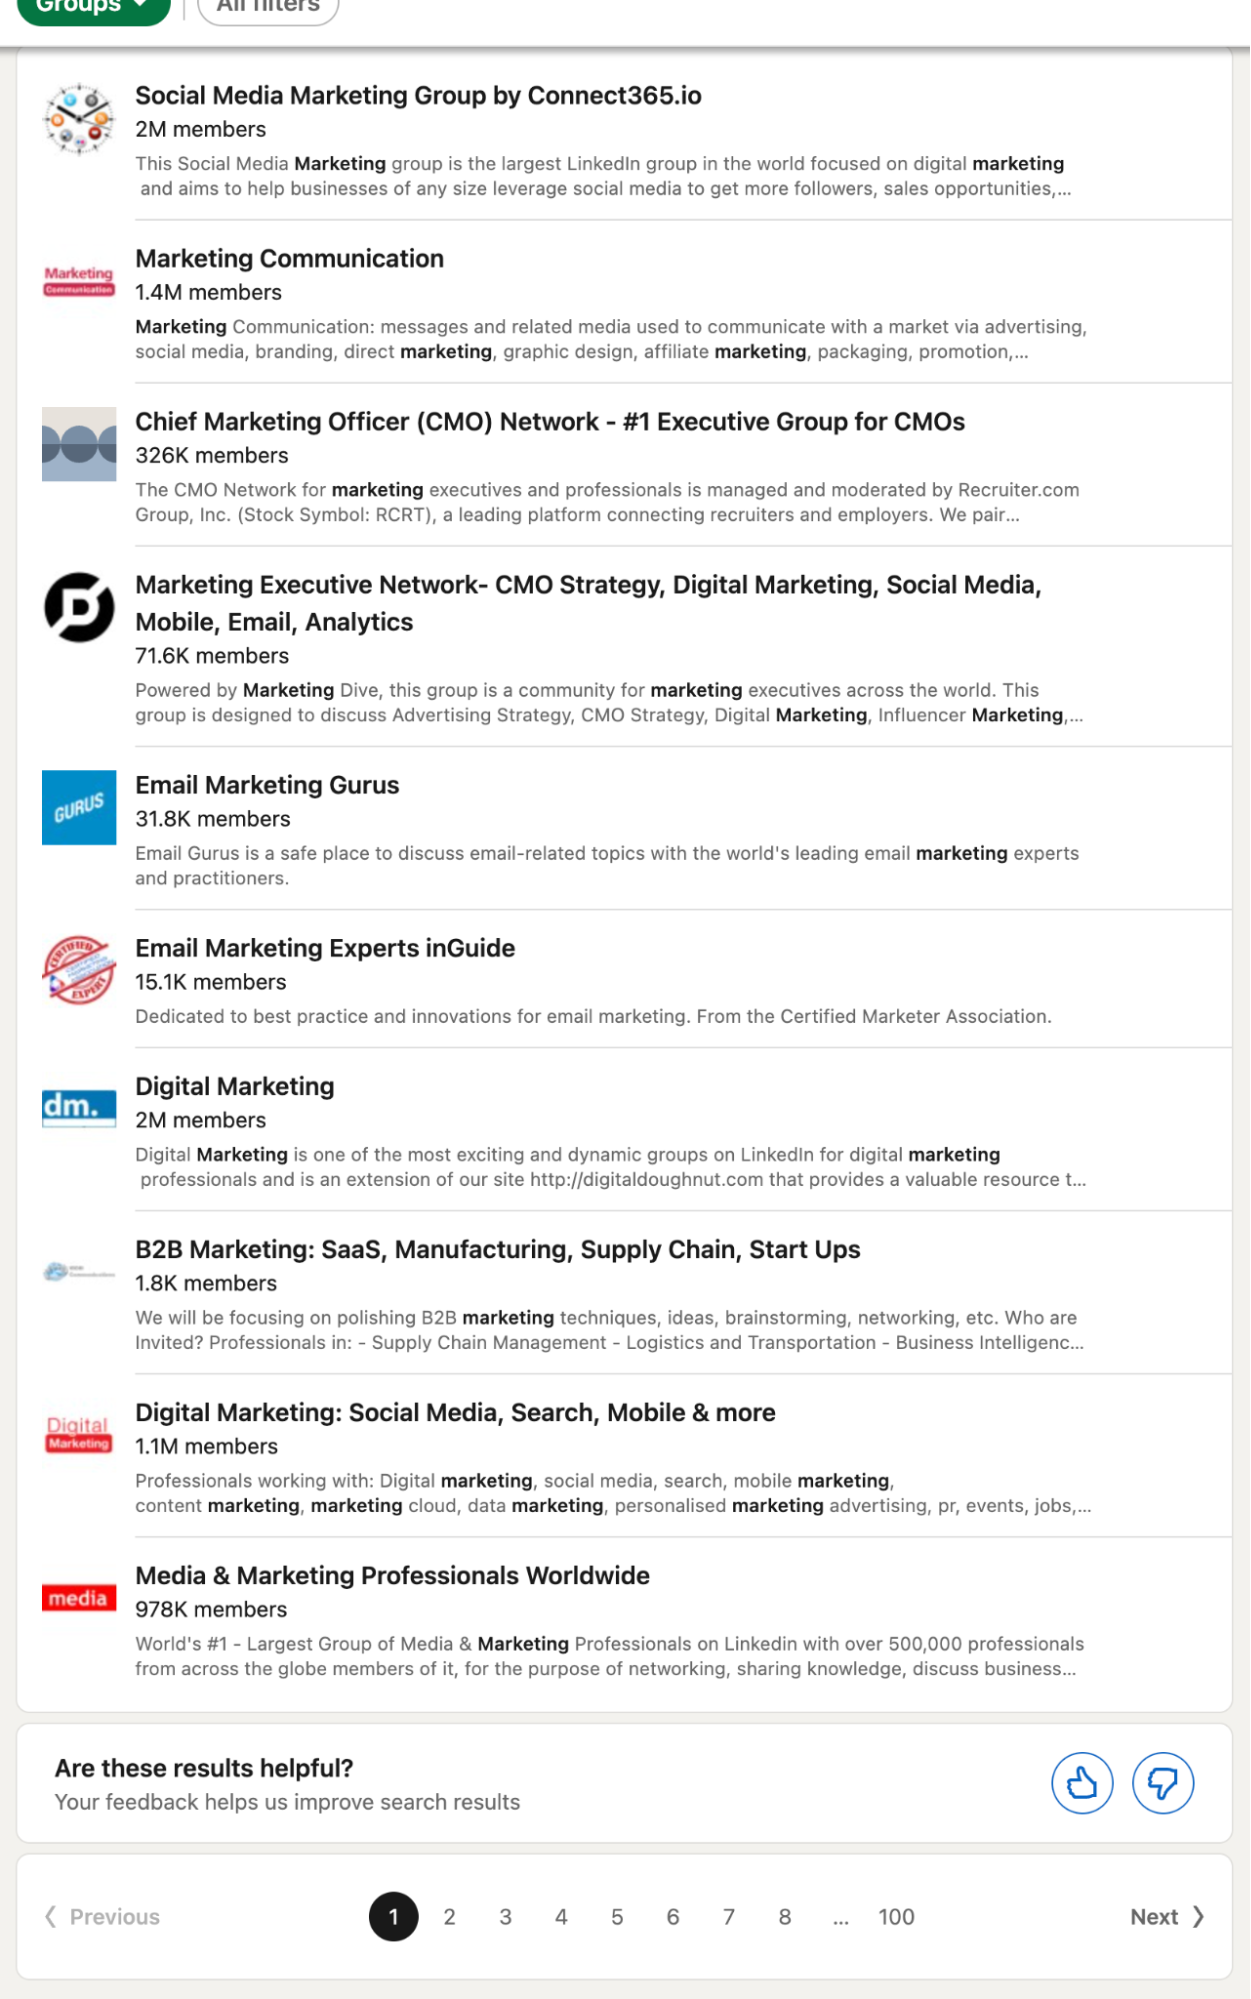 A list of LinkedIn groups for marketers